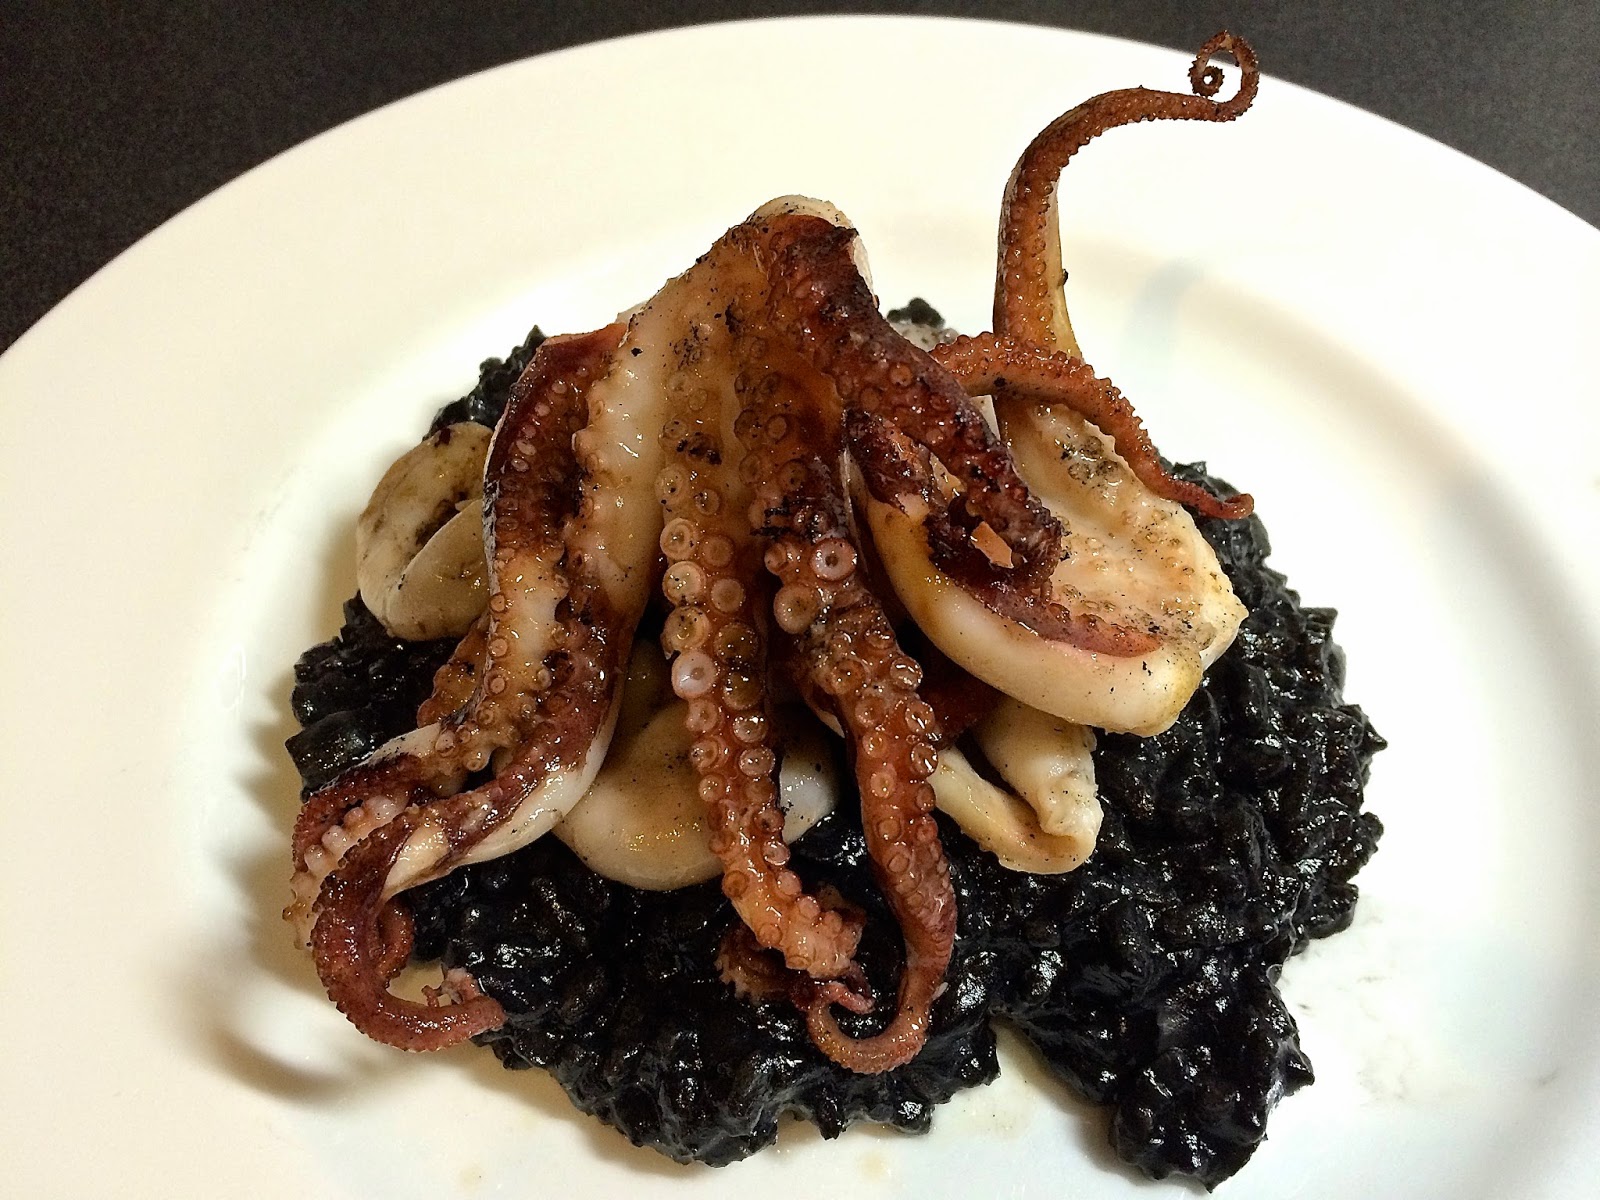 Barbequed baby octopus with squid ink risotto.